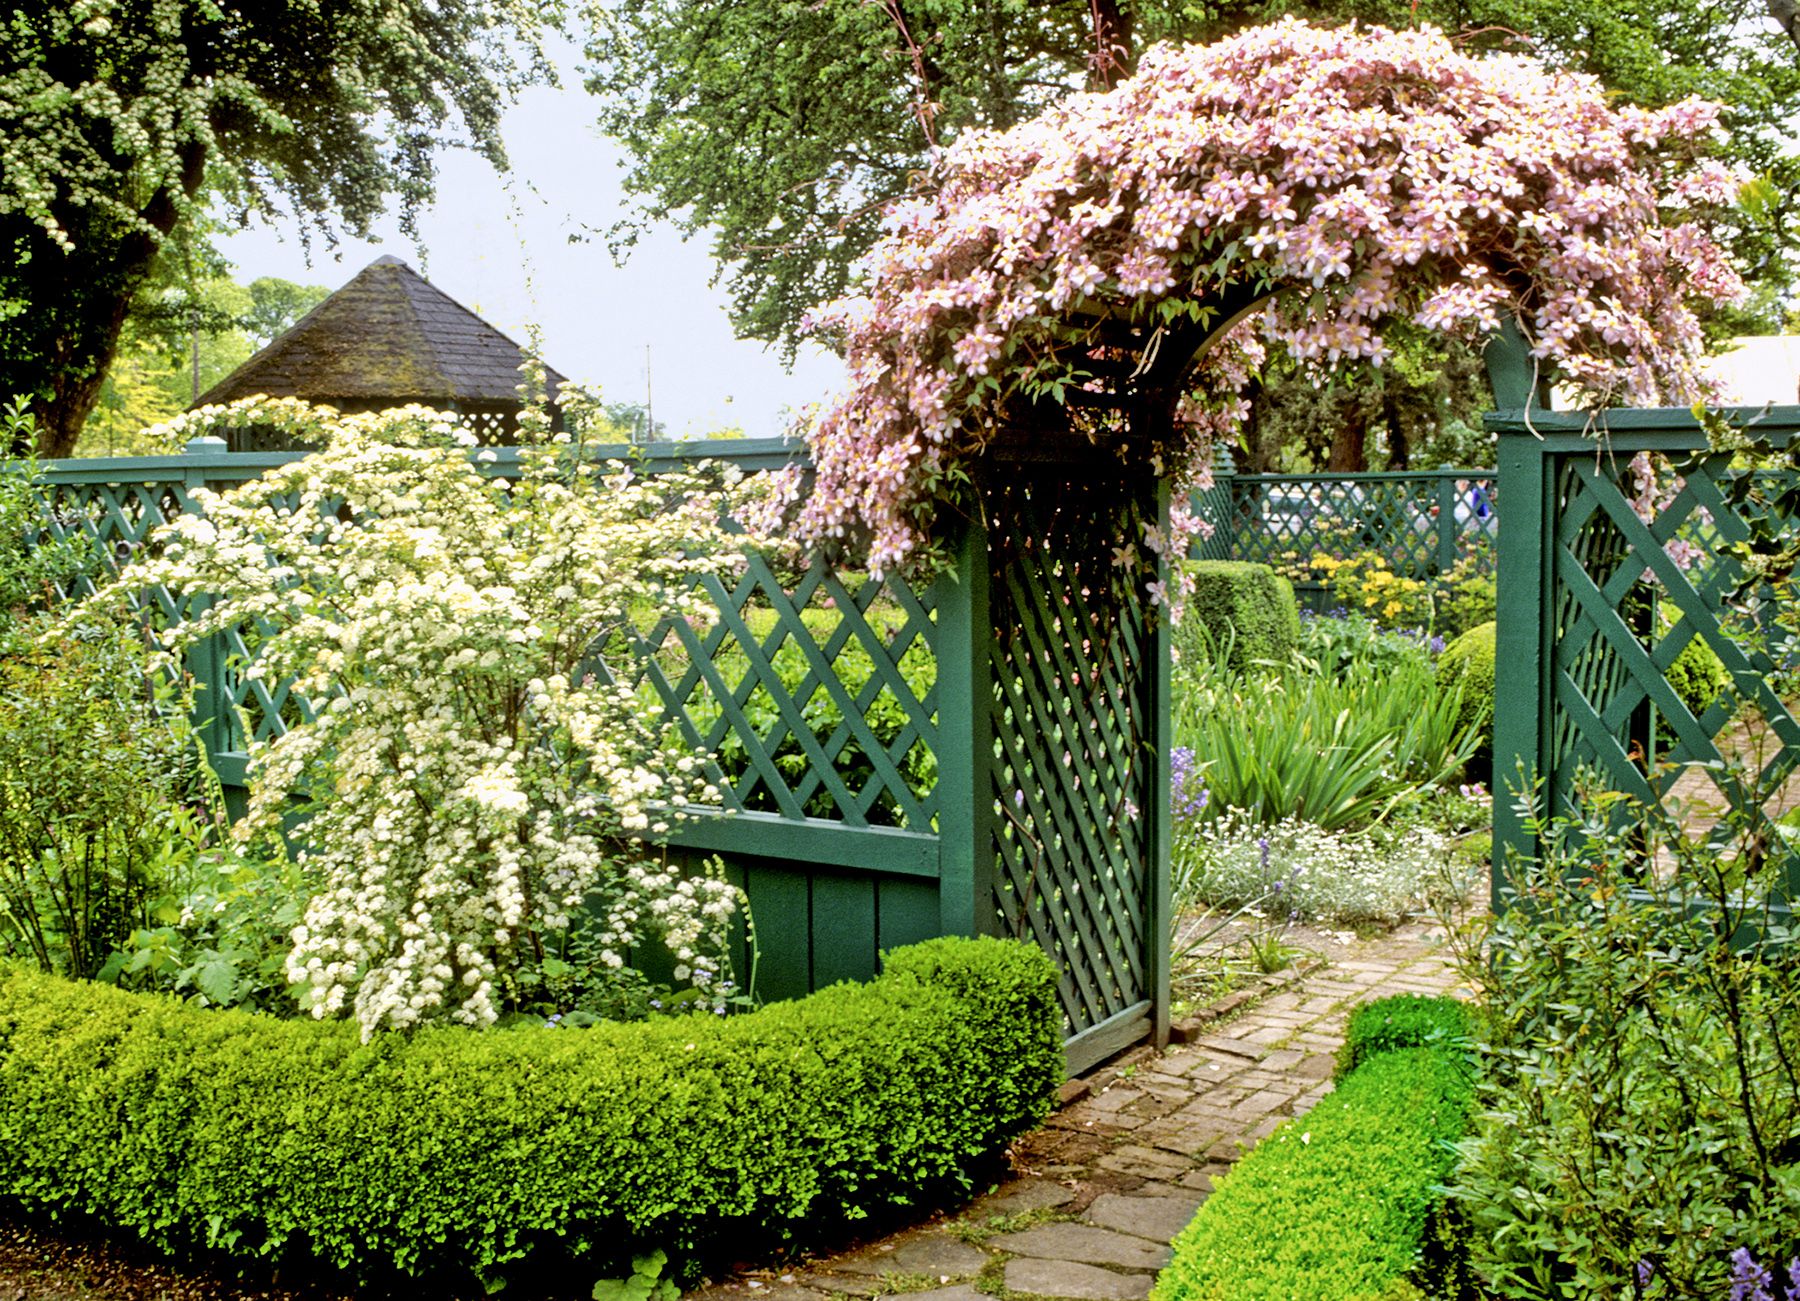 8 Essential Elements For Planning A Cottage Garden - This Old House